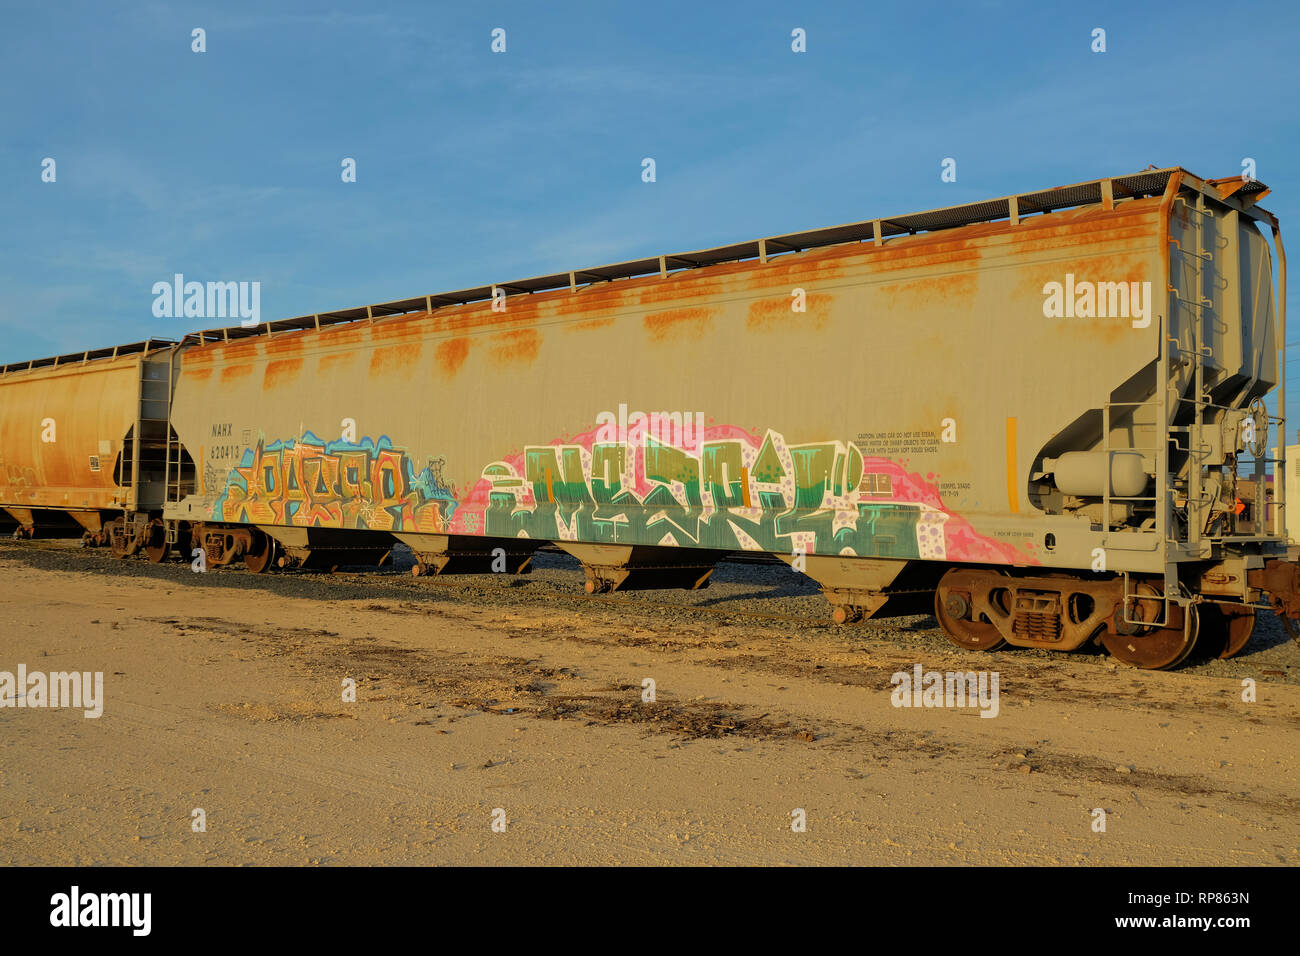 Covered hopper railway car parked on train tracks in Bryan, Texas, USA; graffiti on the side of a train car. Stock Photo